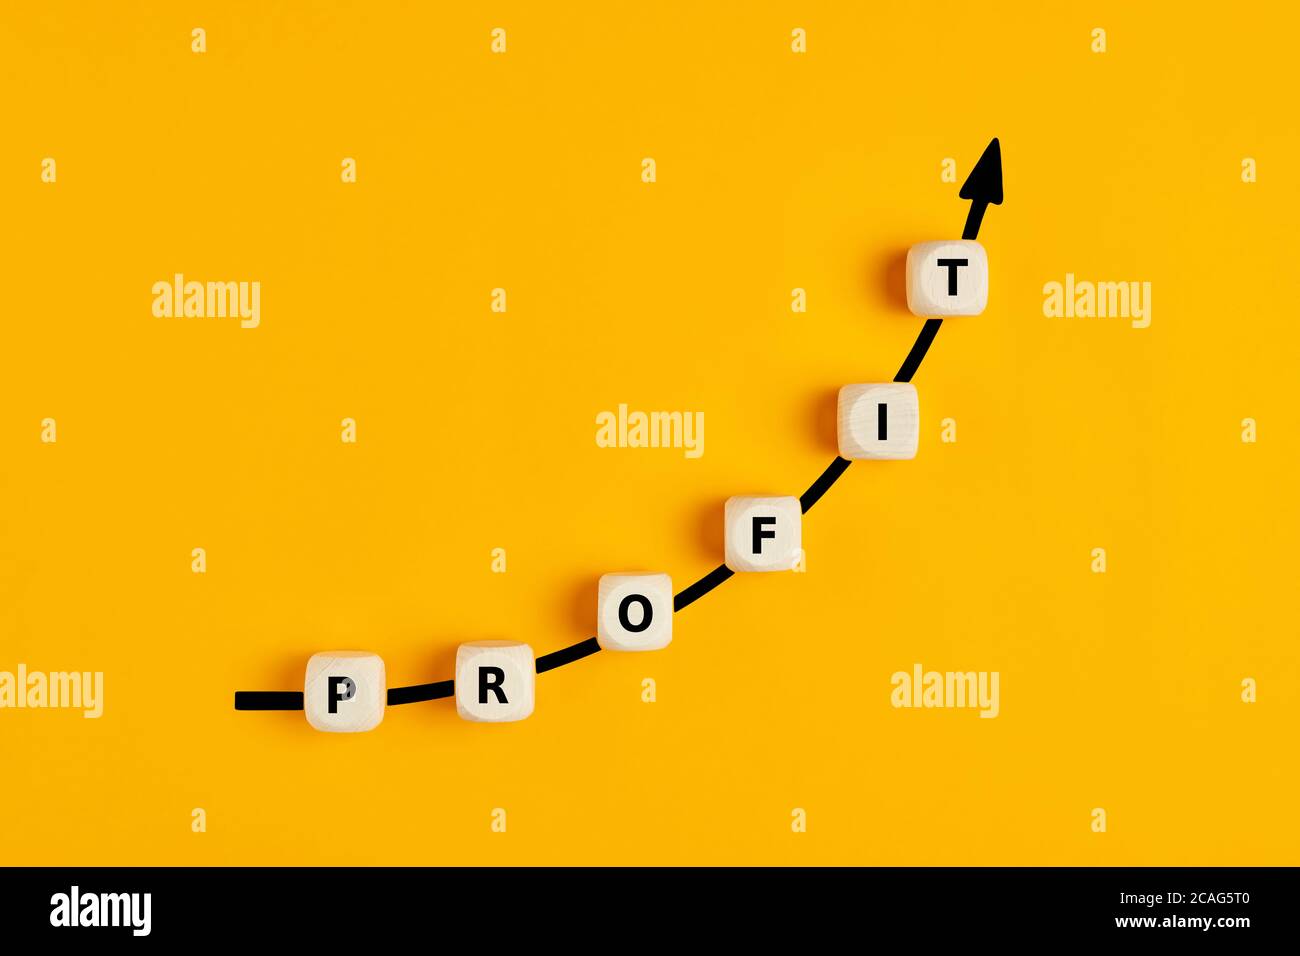 Financial or business profit growth concept with text letters on wooden blocks with an ascending arrow graph Stock Photo